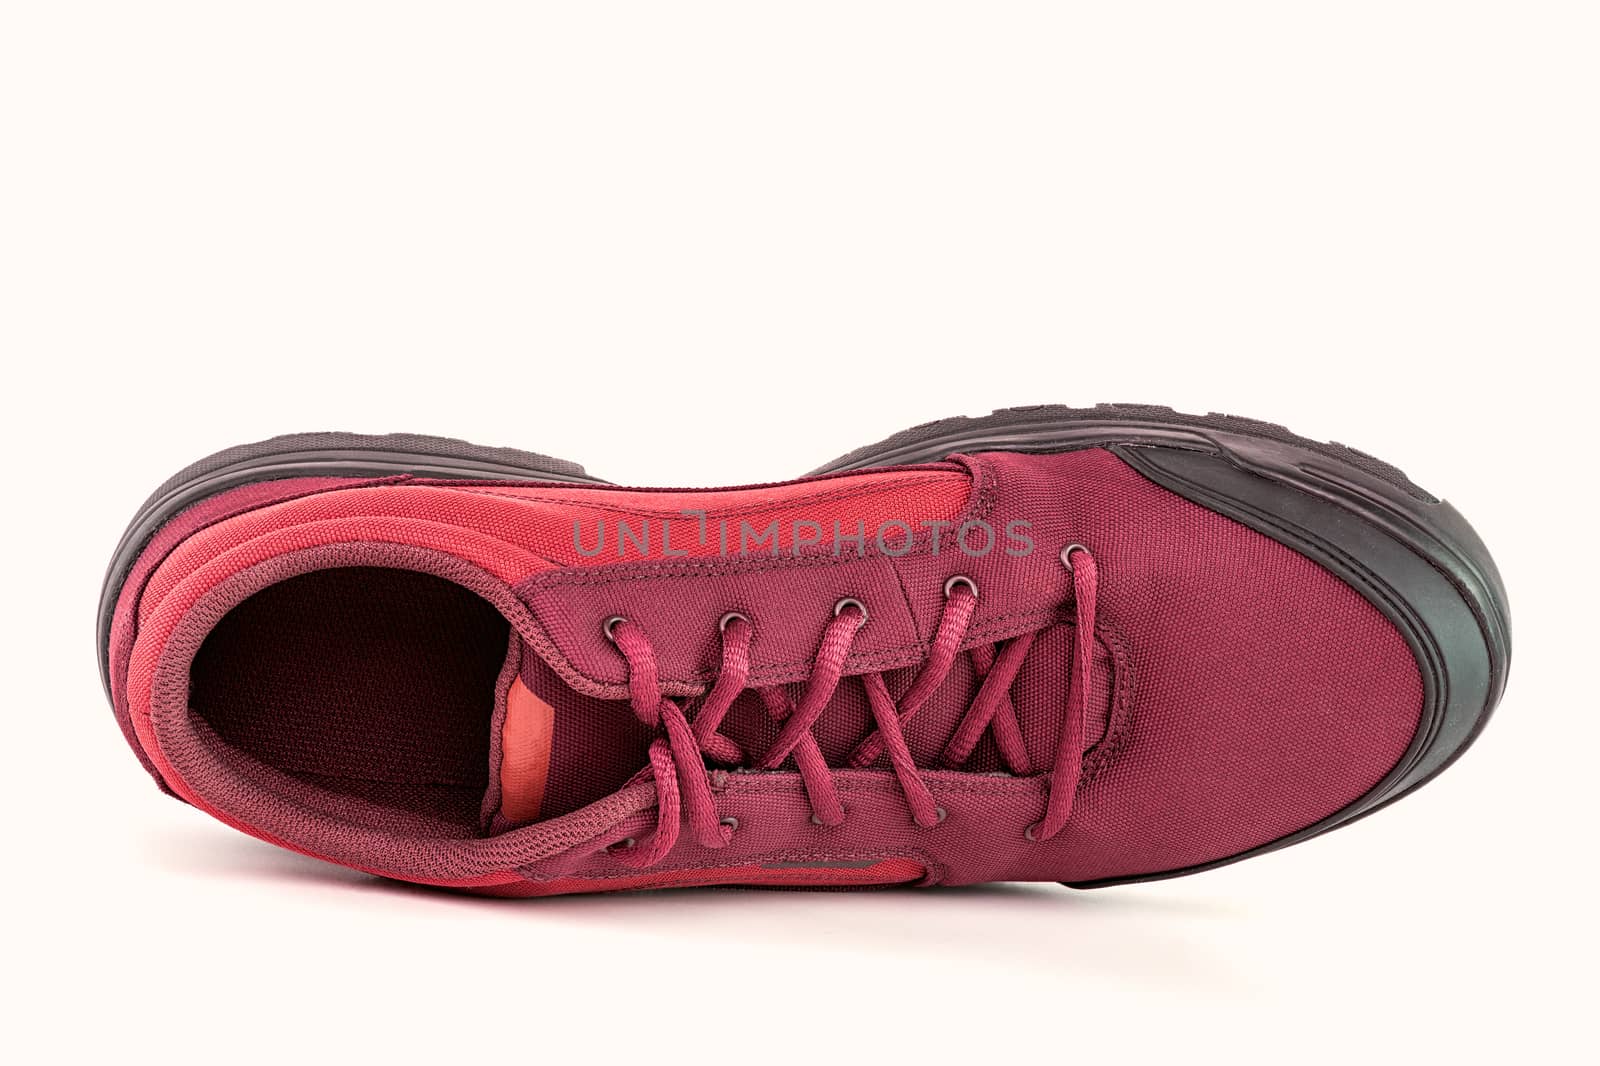 one right cheap red fabric hiking shoe isolated on white background.